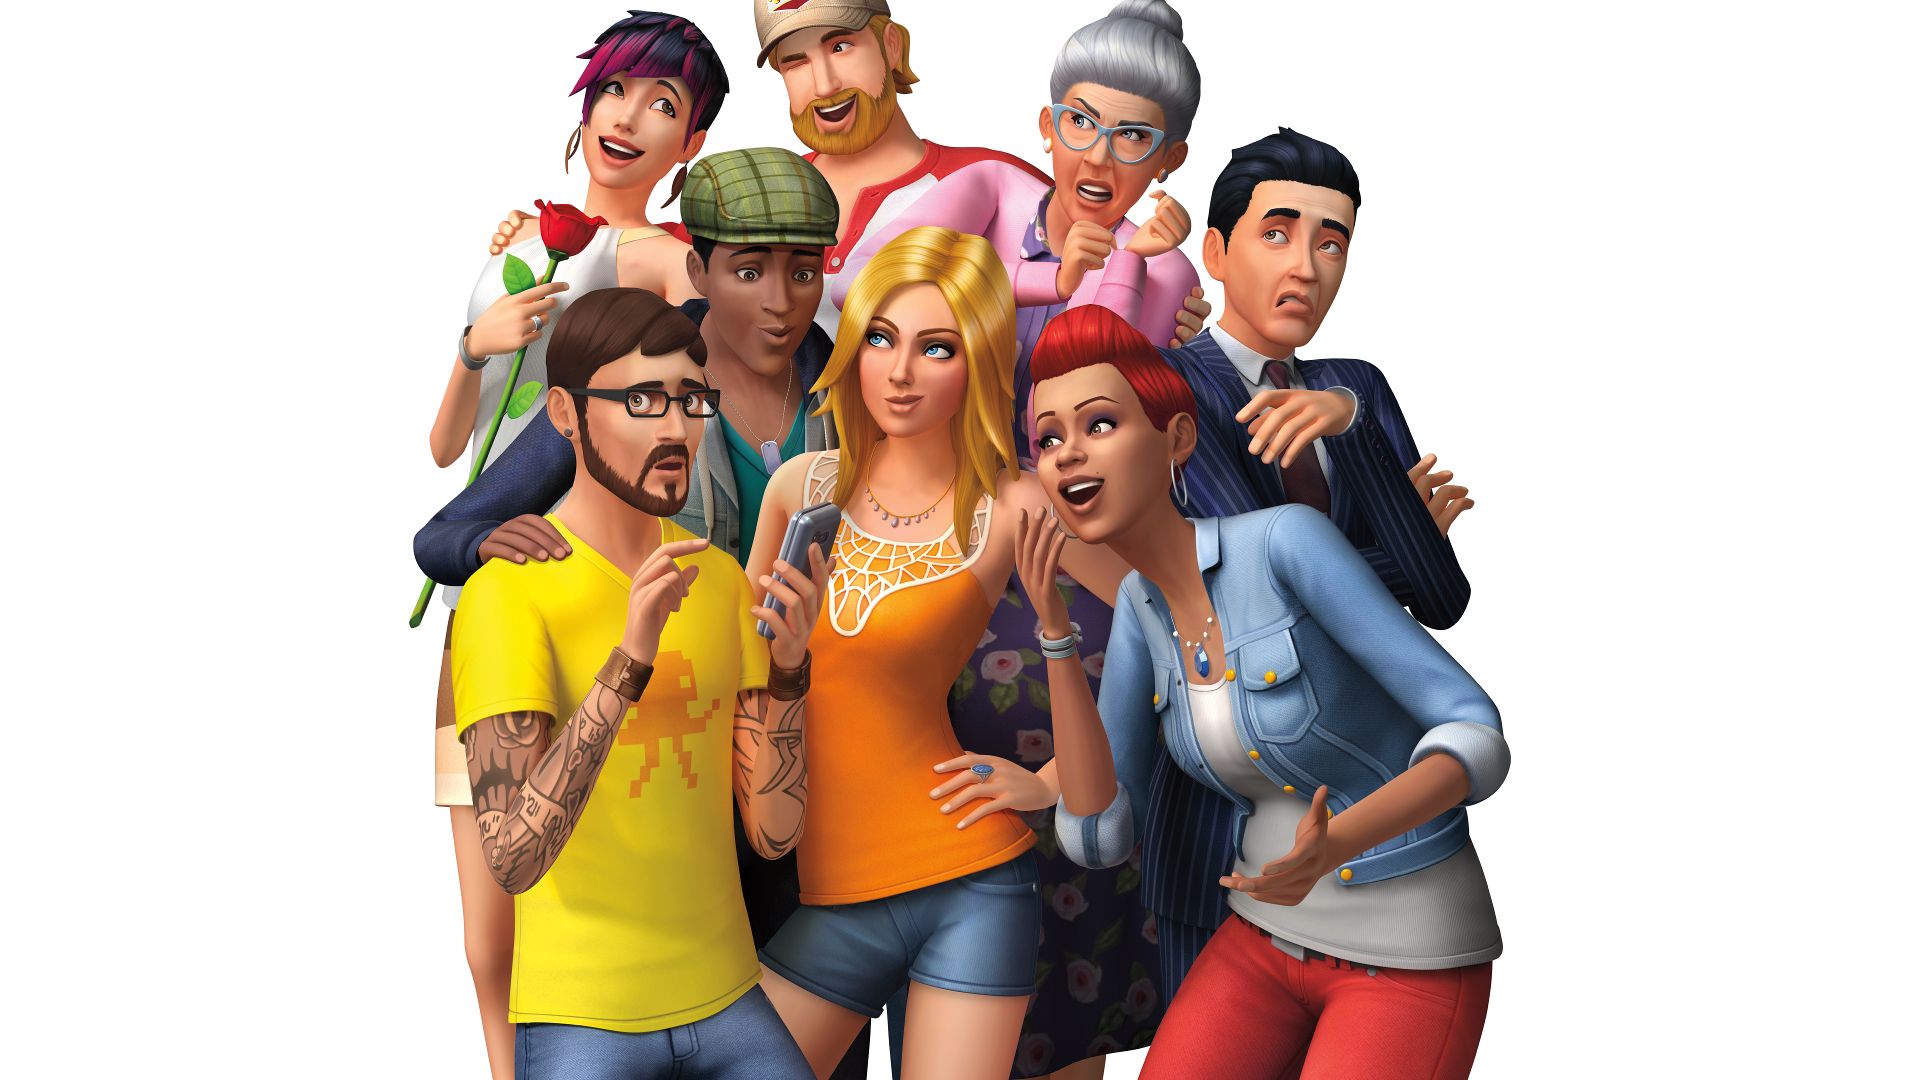 Http://www.ea.com/games/the-sims/the-sims-4